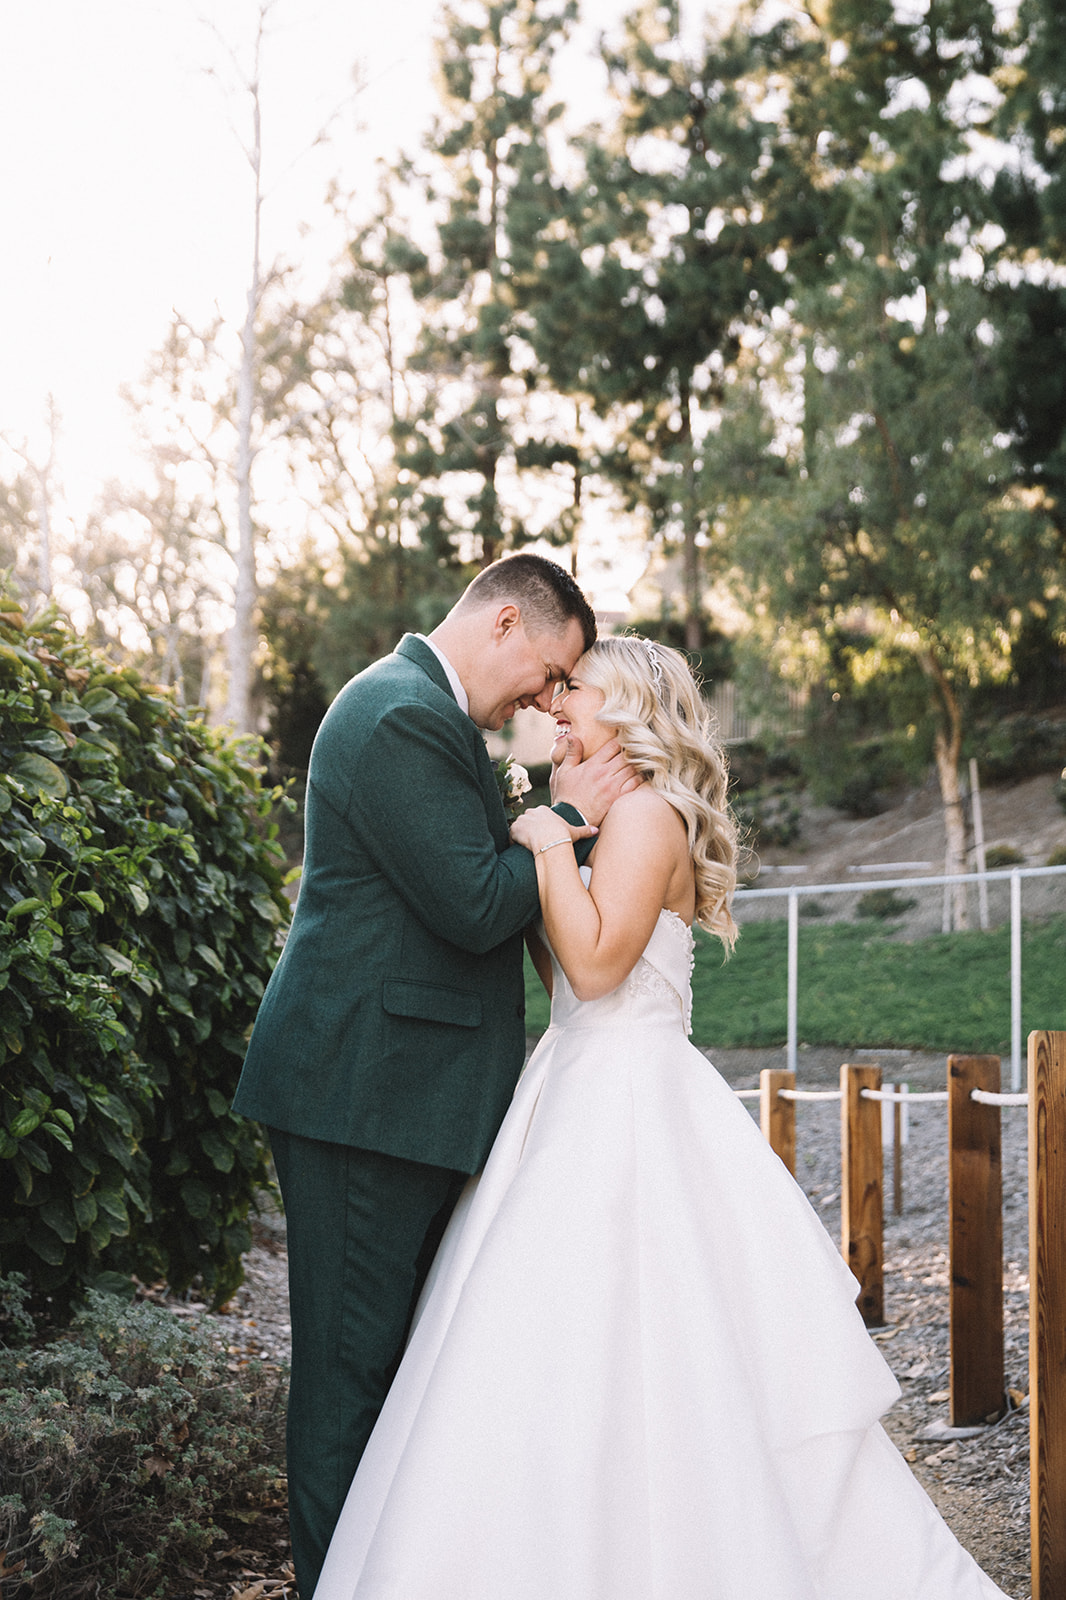 Golden hour portraits of this newly married couple at their Orange County wedding at the Barn at Aliso Viejo Ranch. 